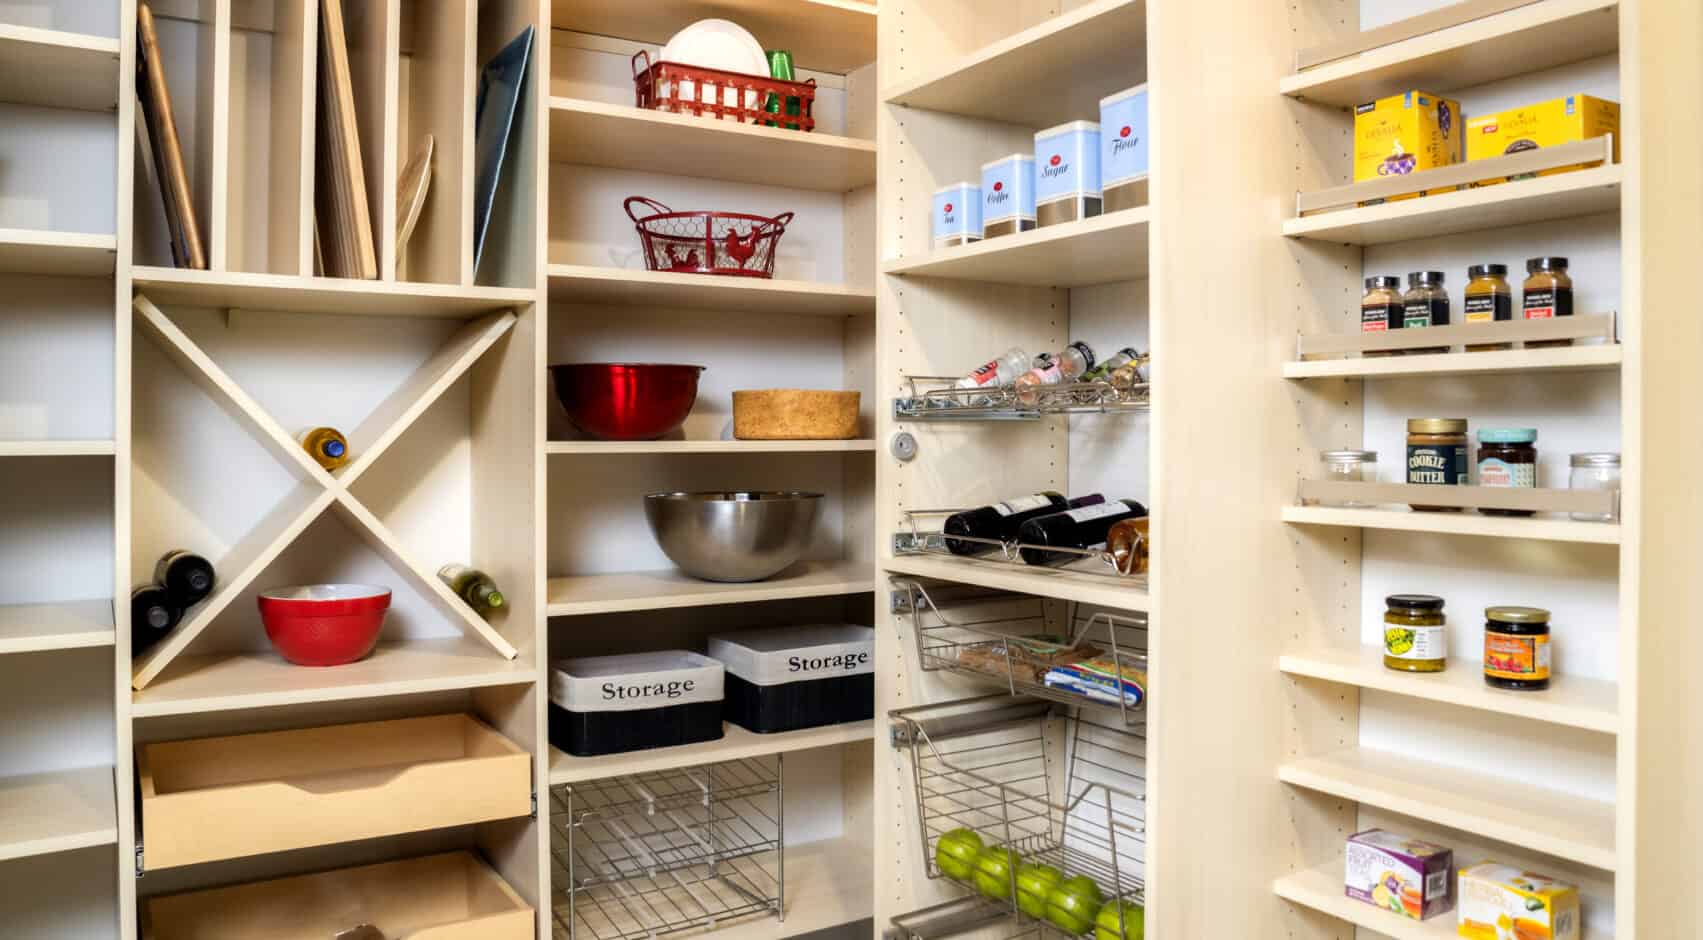 pantry storage with shelving and baskets to optimize space and functionality